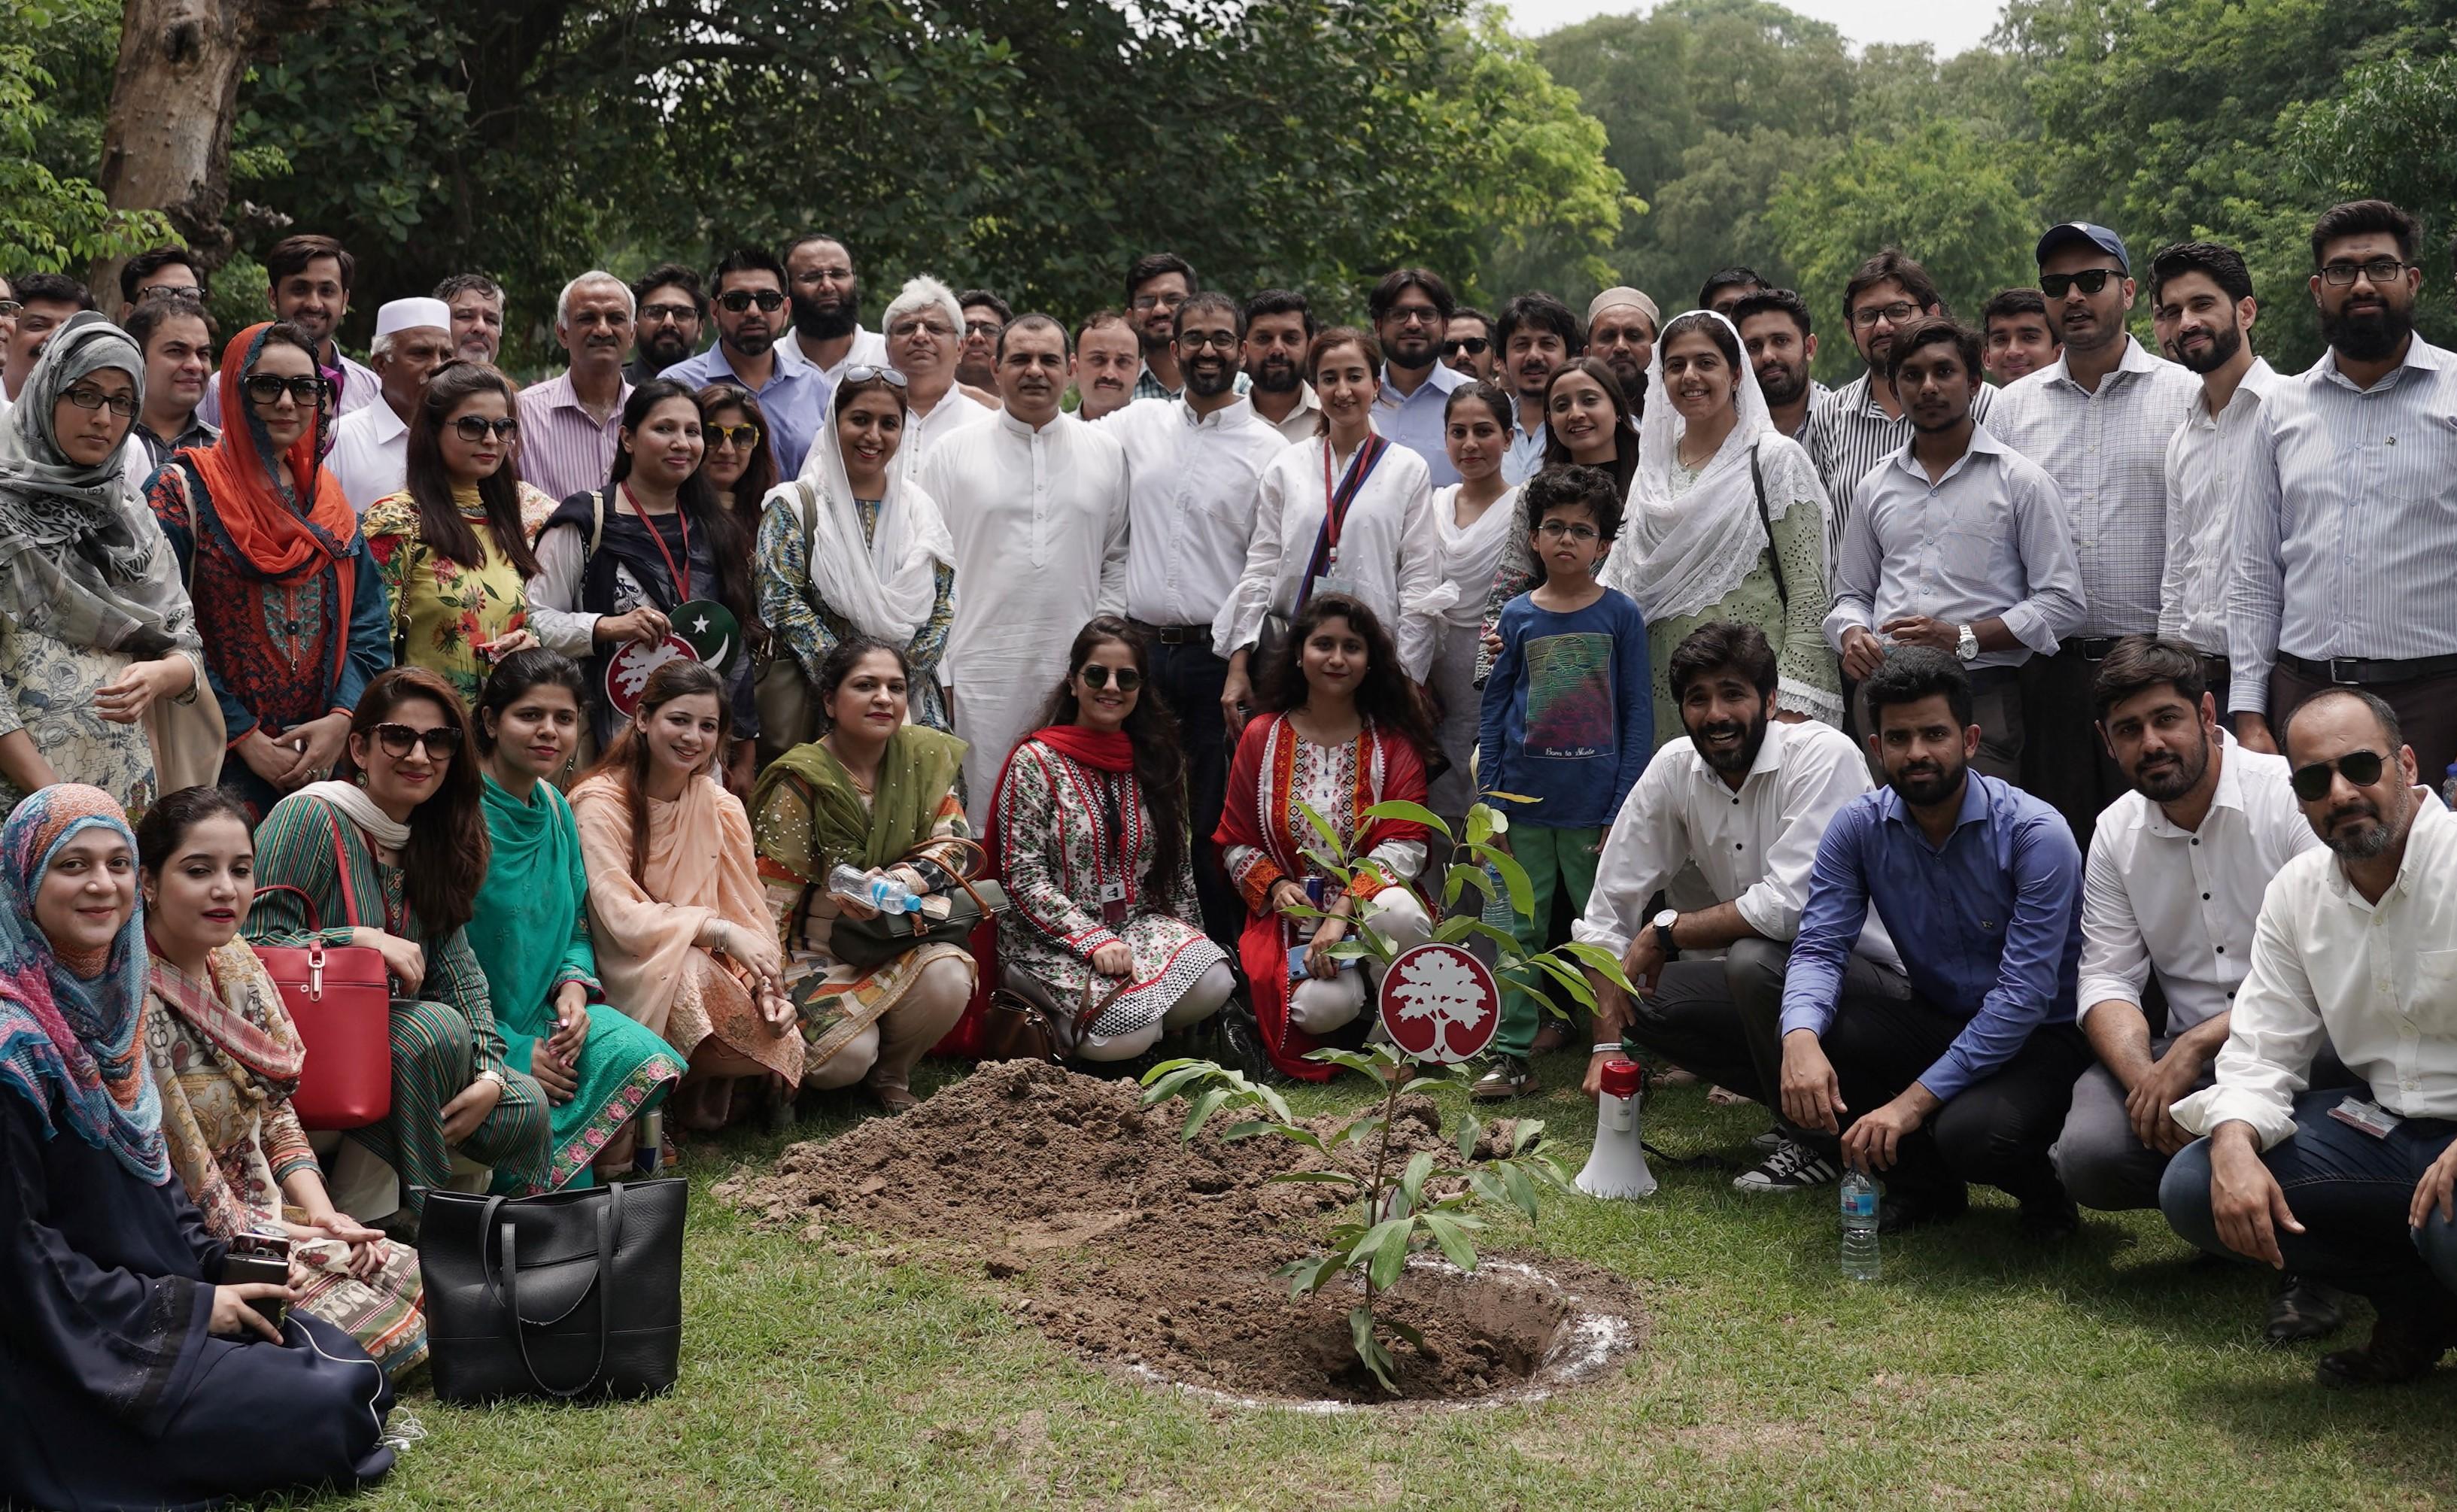 FINCA Celebrates “Greener Pakistan” on the Eve of Independence Day